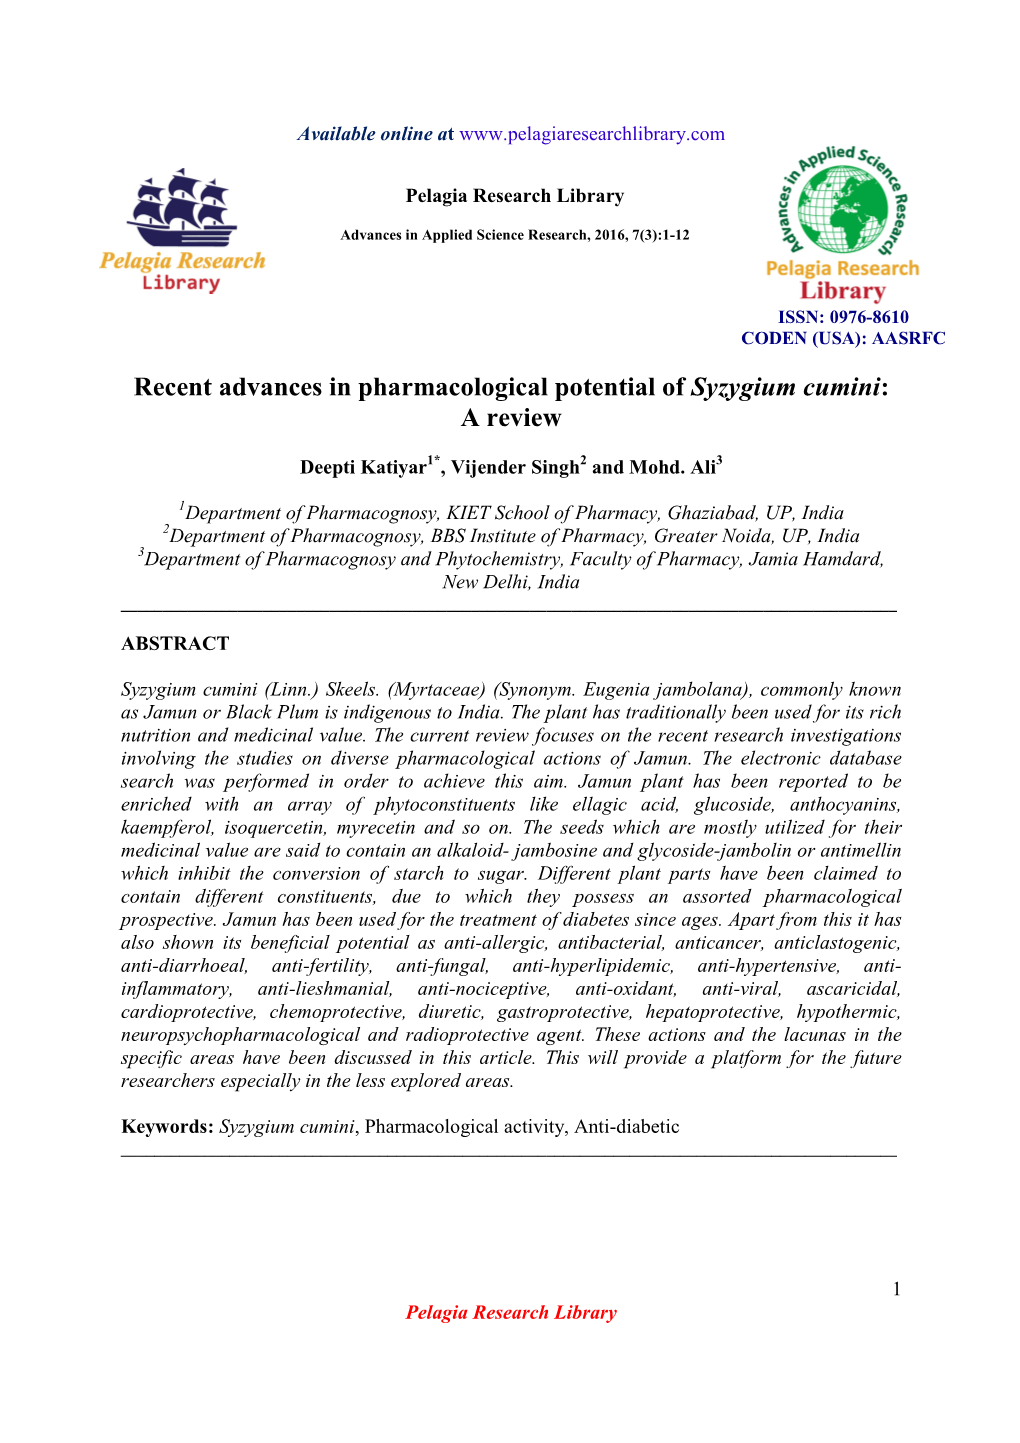 Recent Advances in Pharmacological Potential of Syzygium Cumini: A